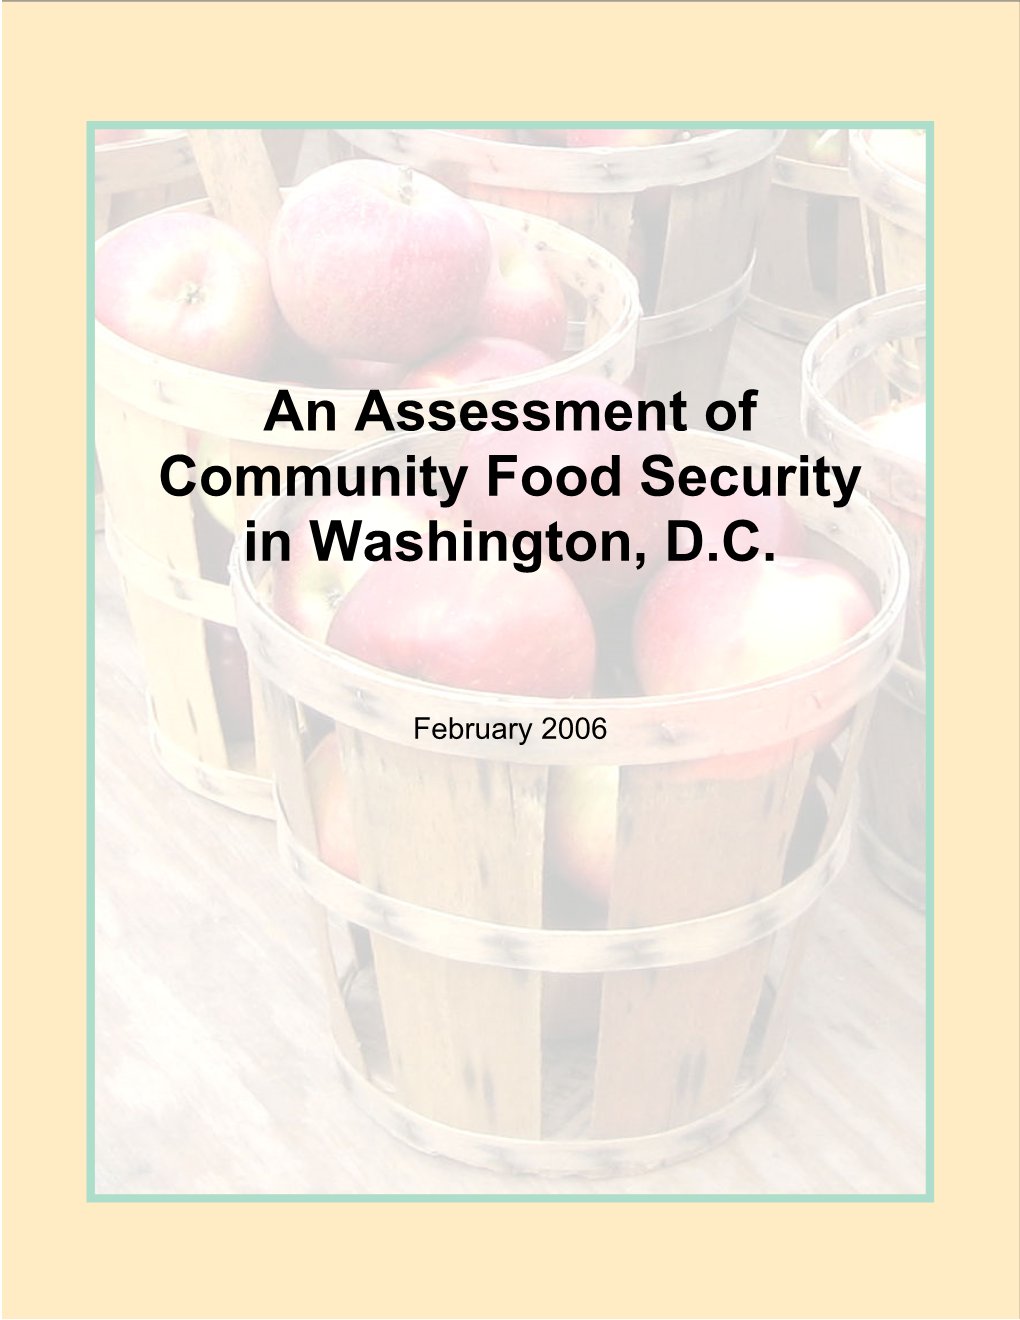 An Assessment of Community Food Security in Washington, D.C